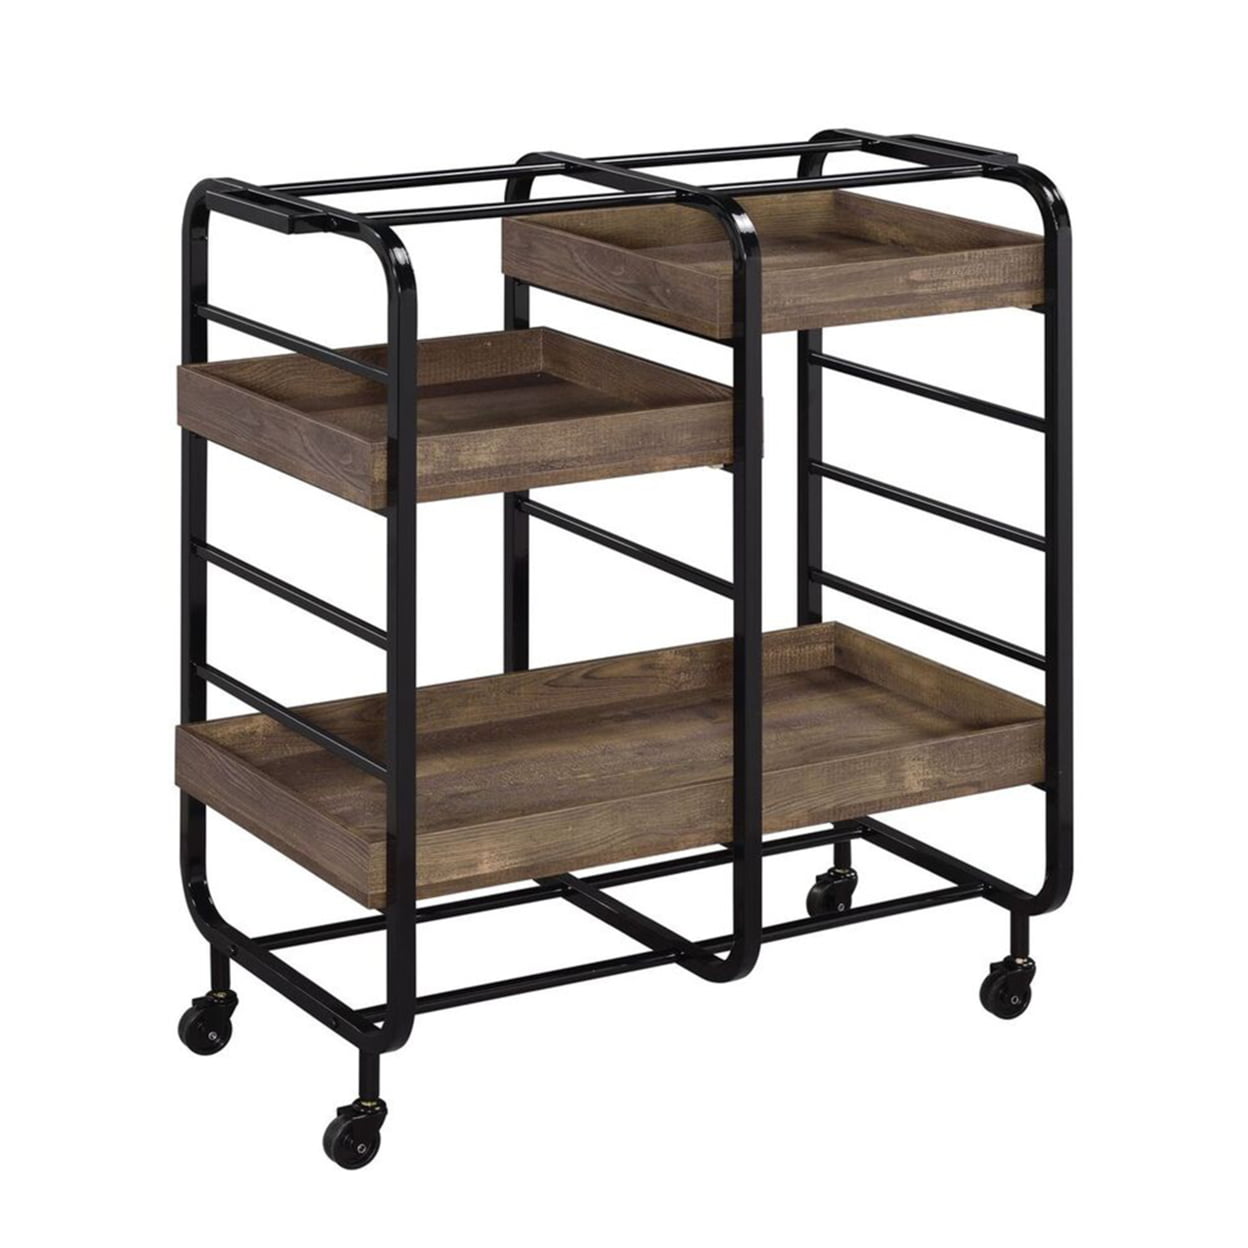 Picture of Benjara BM211118 Metal Frame Serving Cart with 3 Open Storage & Casters - Brown & Black - 38 x 17 x 34 in.